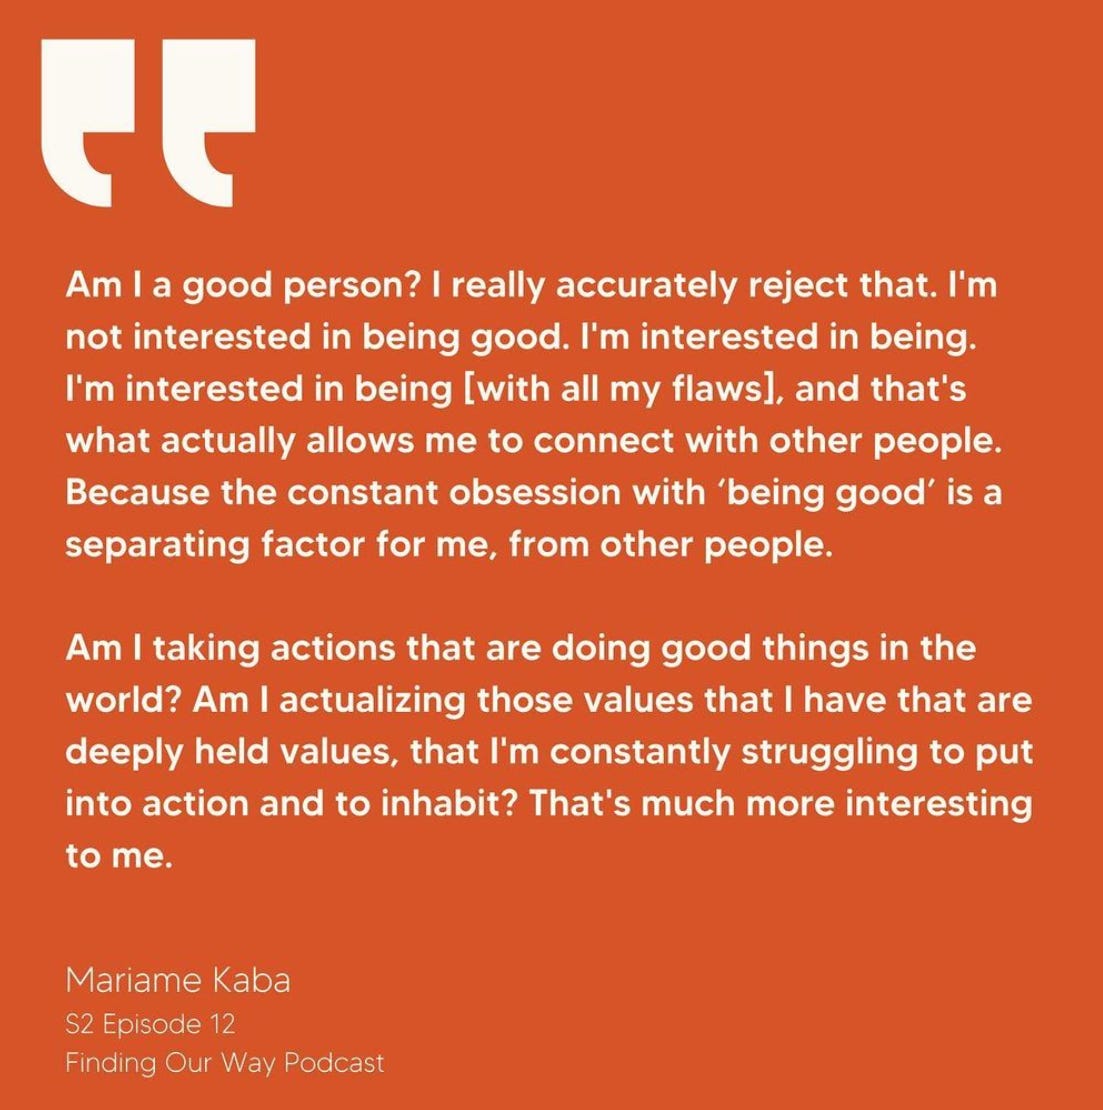 "Am I a good person? I really accurately reject that. I'm not interested in being good. I'm interested in being [with all my flaws]. That's what actually allows me to connect with other people. Because the constant obsession with 'being good' is a separating factor for me, from other people. Am I taking actions that are doing good things in the world? Am I actualizing those values that I have that are deeply held values, that I'm constantly struggling to put into action and to inhabit? That' much more interesting to me." -Mariame Kaba S2 Episode 12 Finding Our Way Podcast